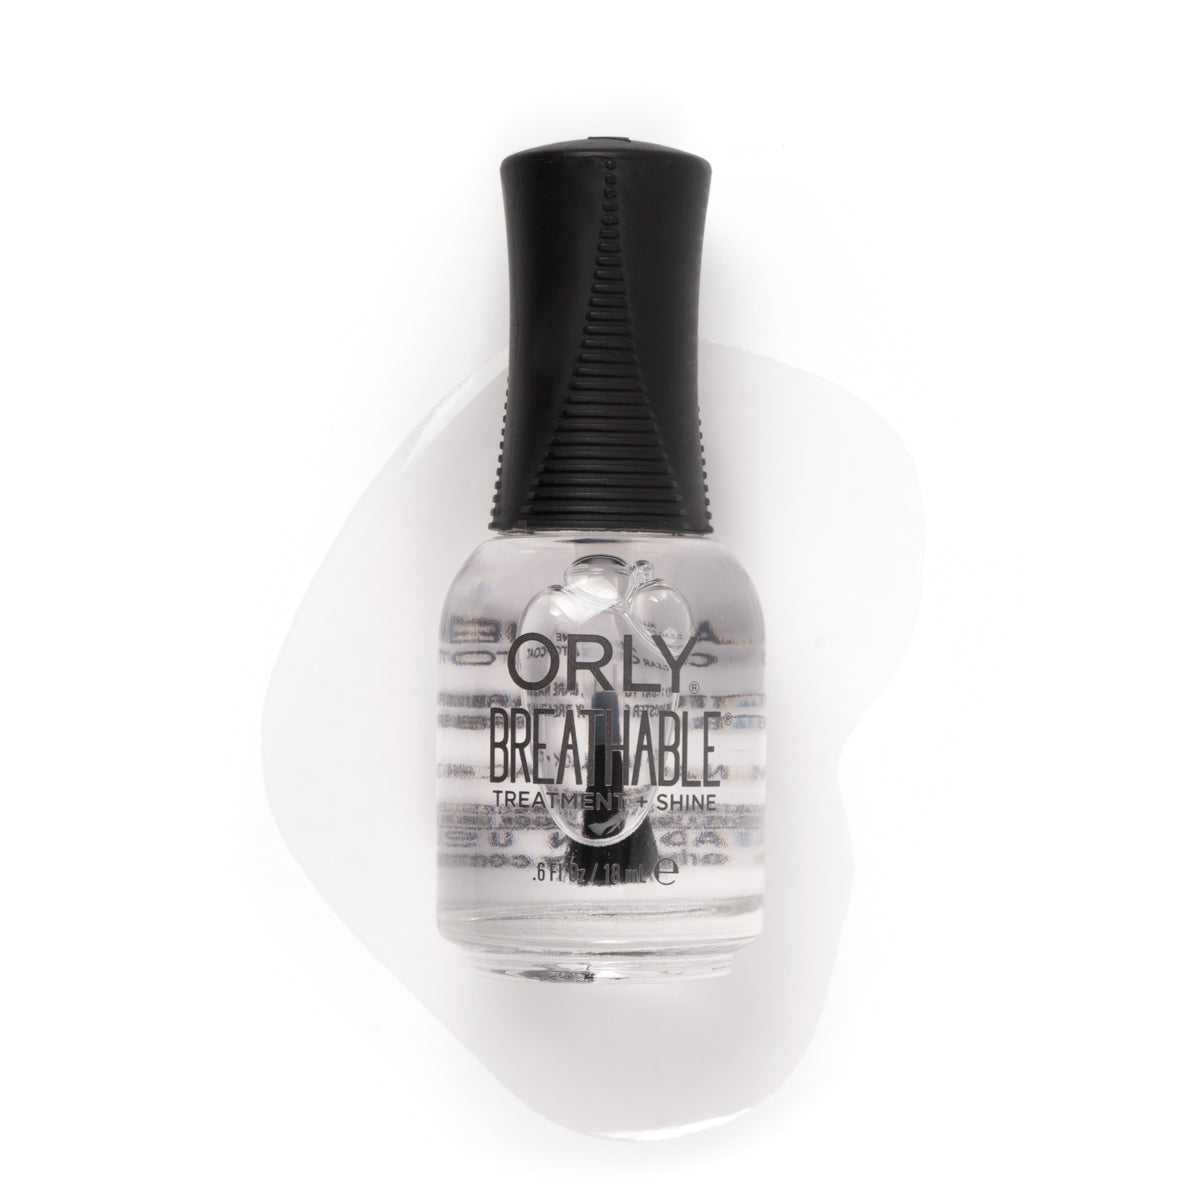 Orly Breathable Treatment + Shine Lacquer